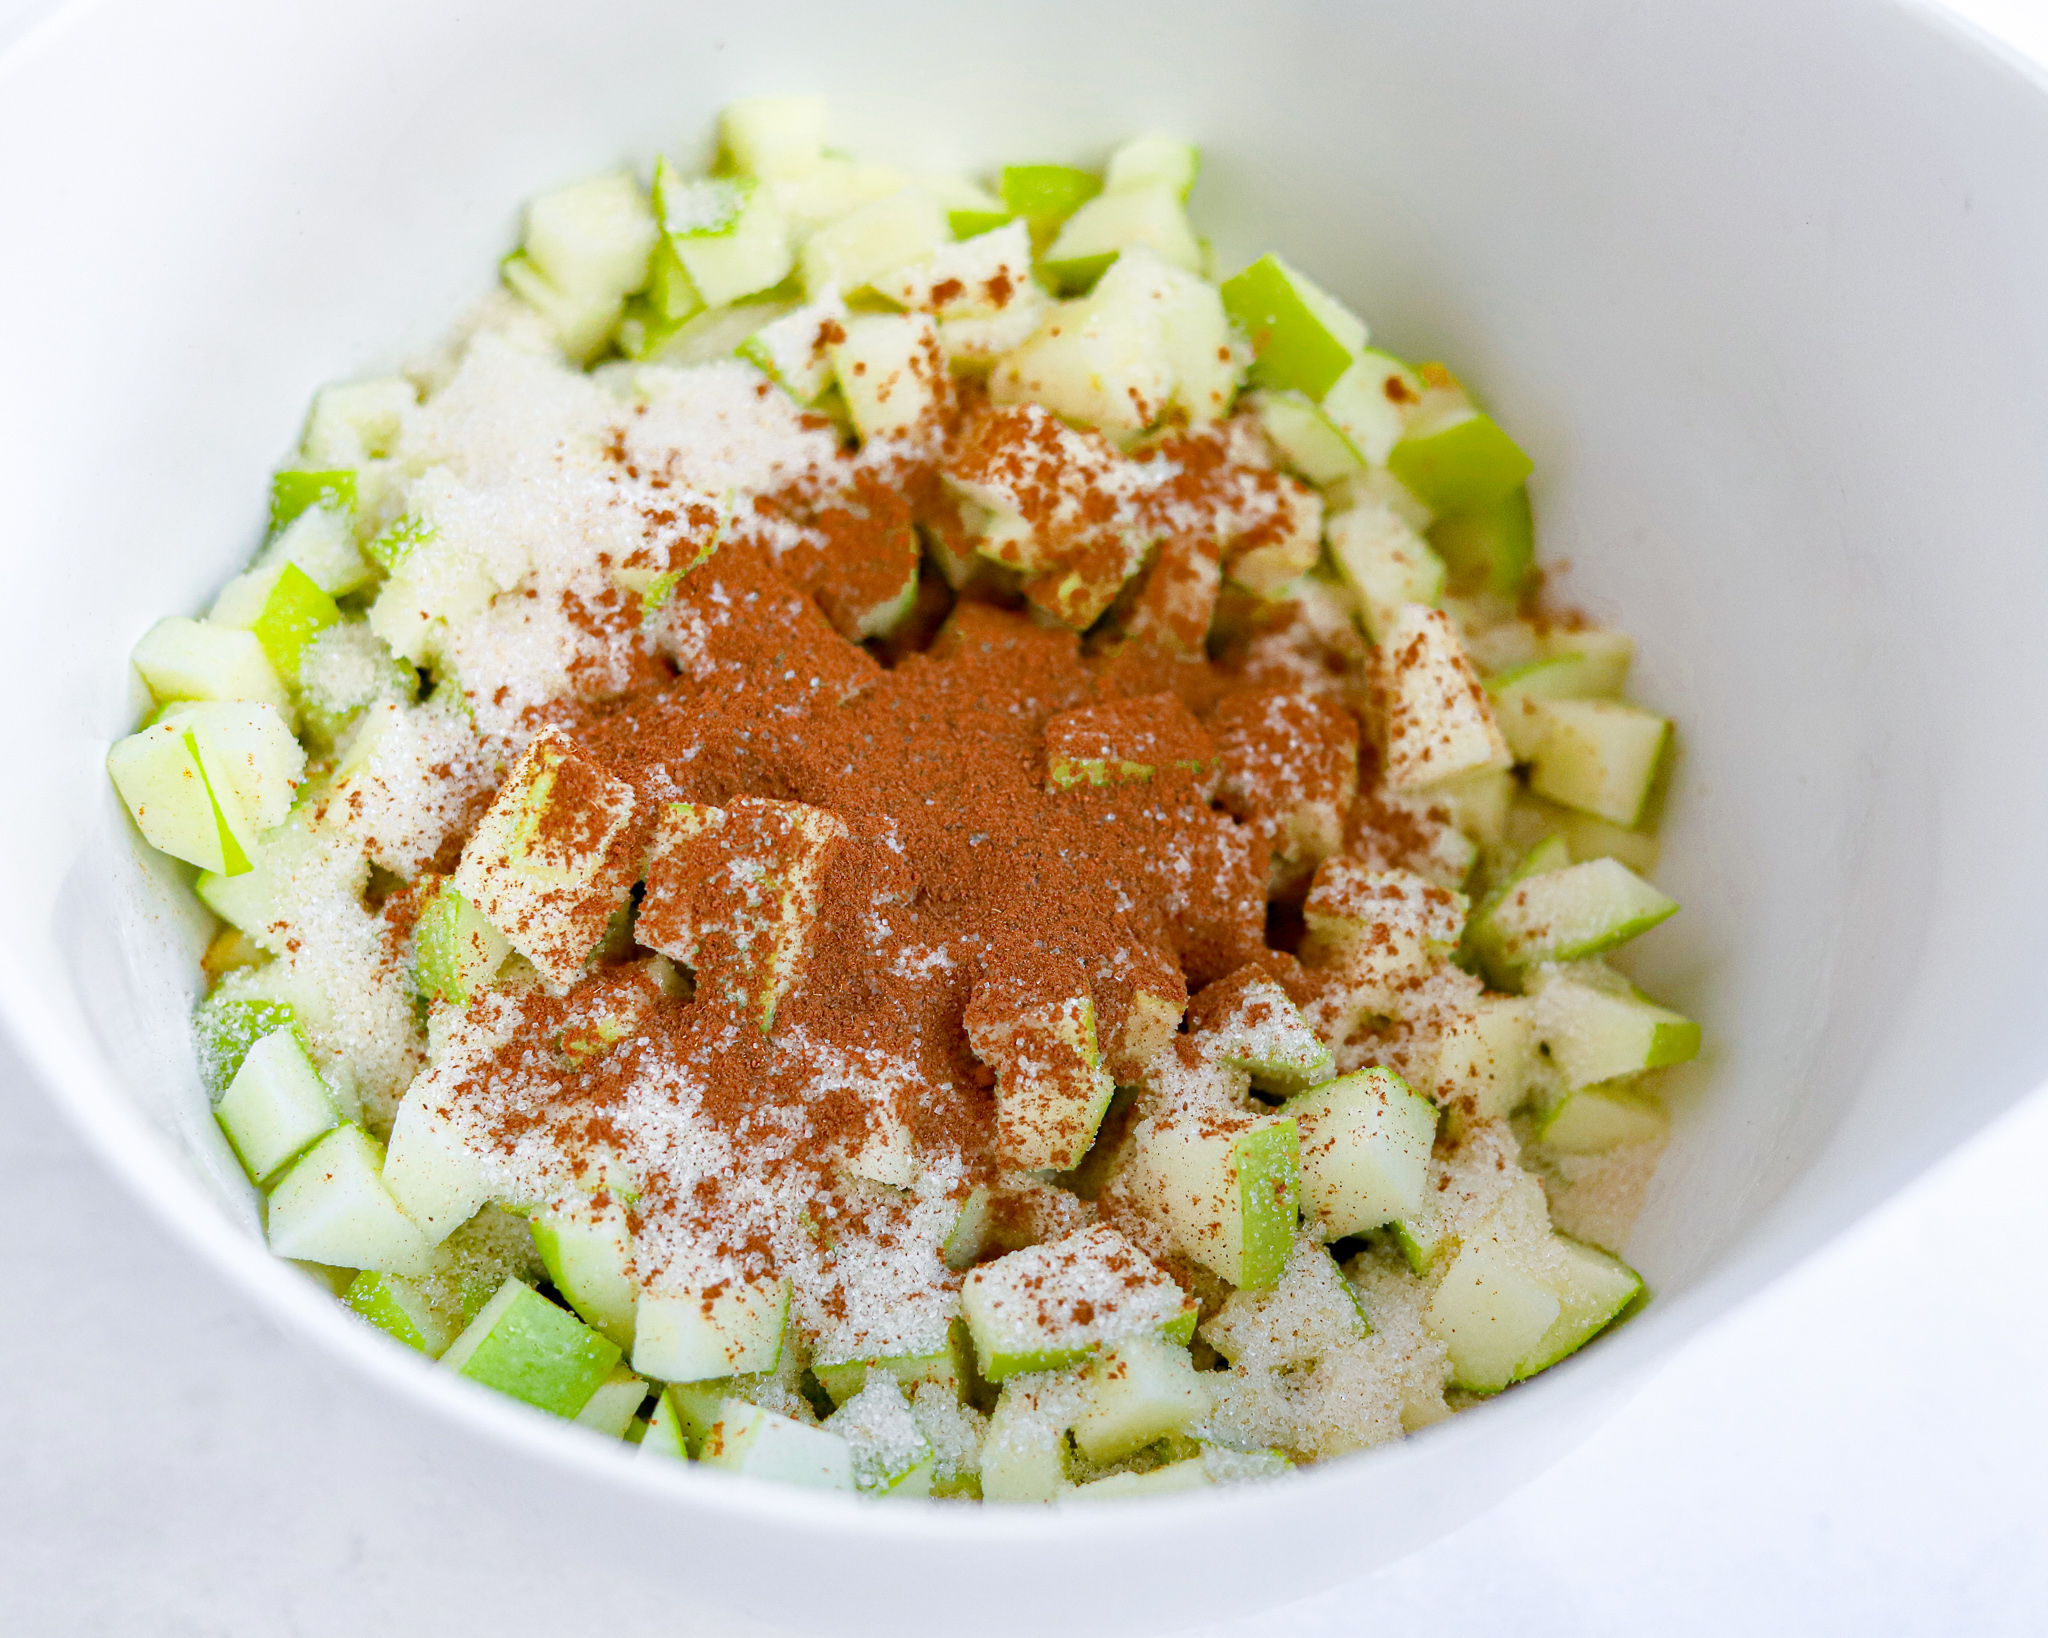 Bowl of green apples diced and covered with a heap of sugar and cinnamon spices before being baked.